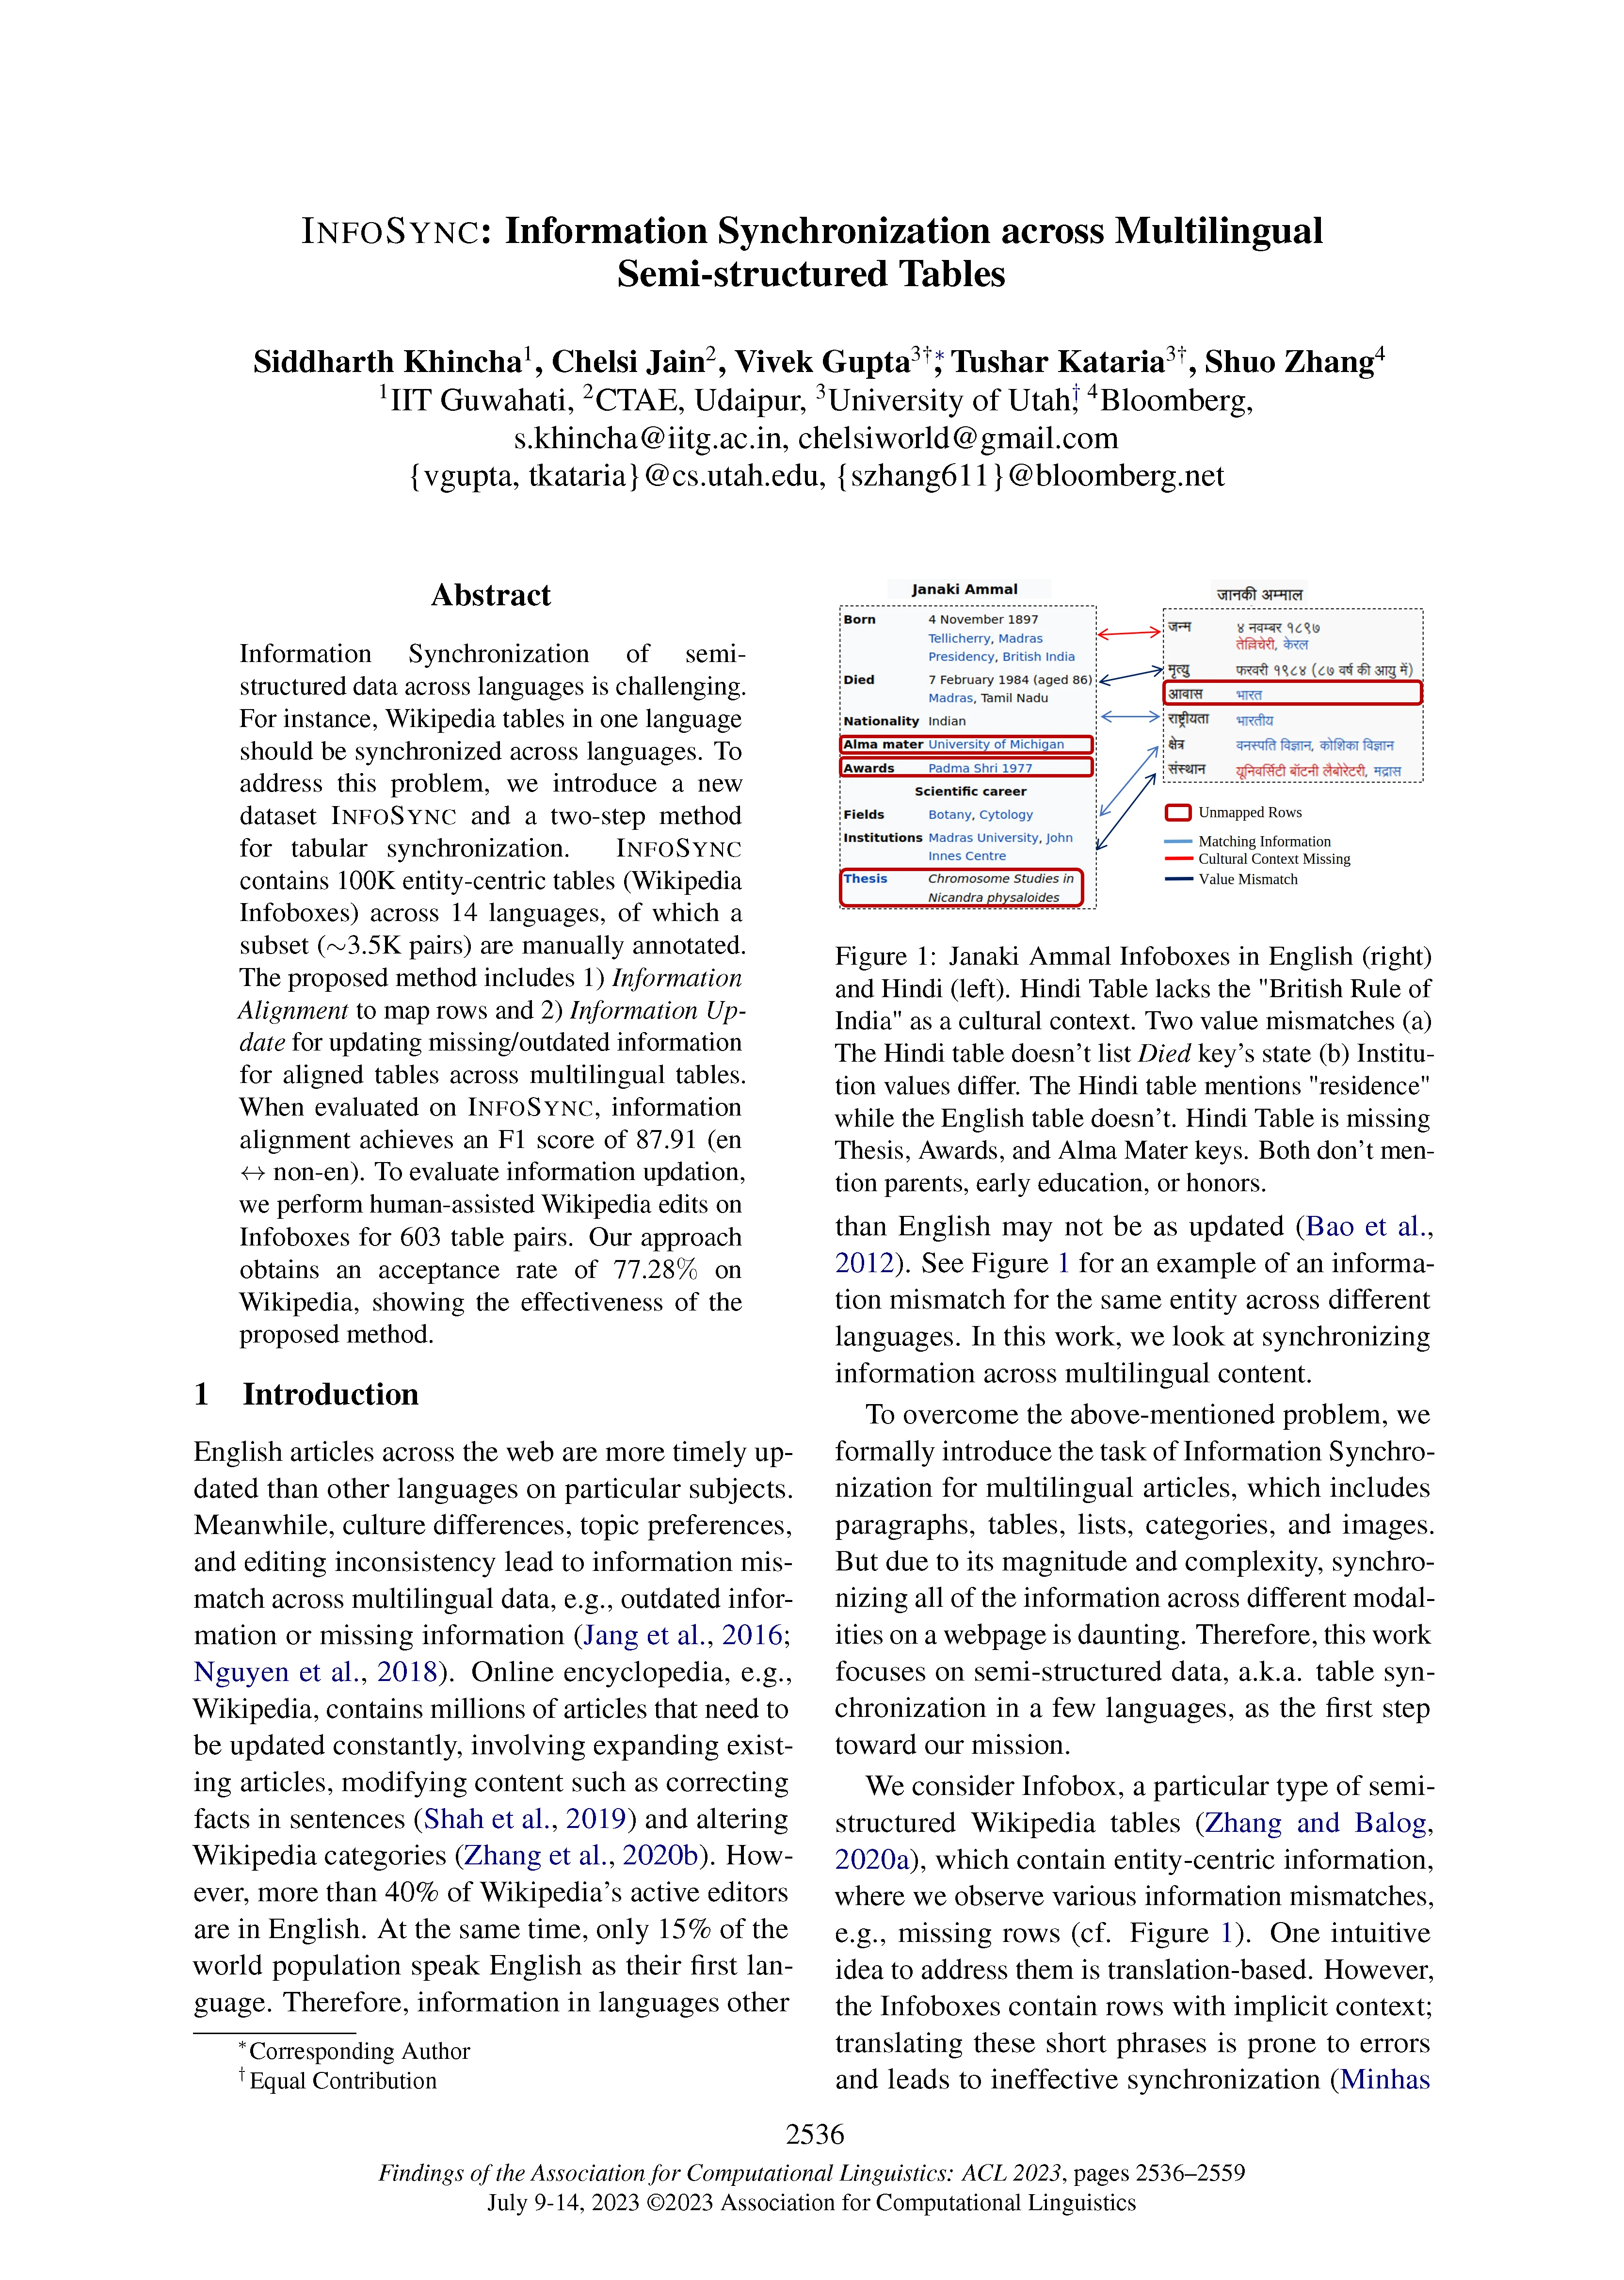 Front page of Findings of the ACL 2023 paper "InfoSync: Information Synchronization across Multilingual Semi-structured Tables"